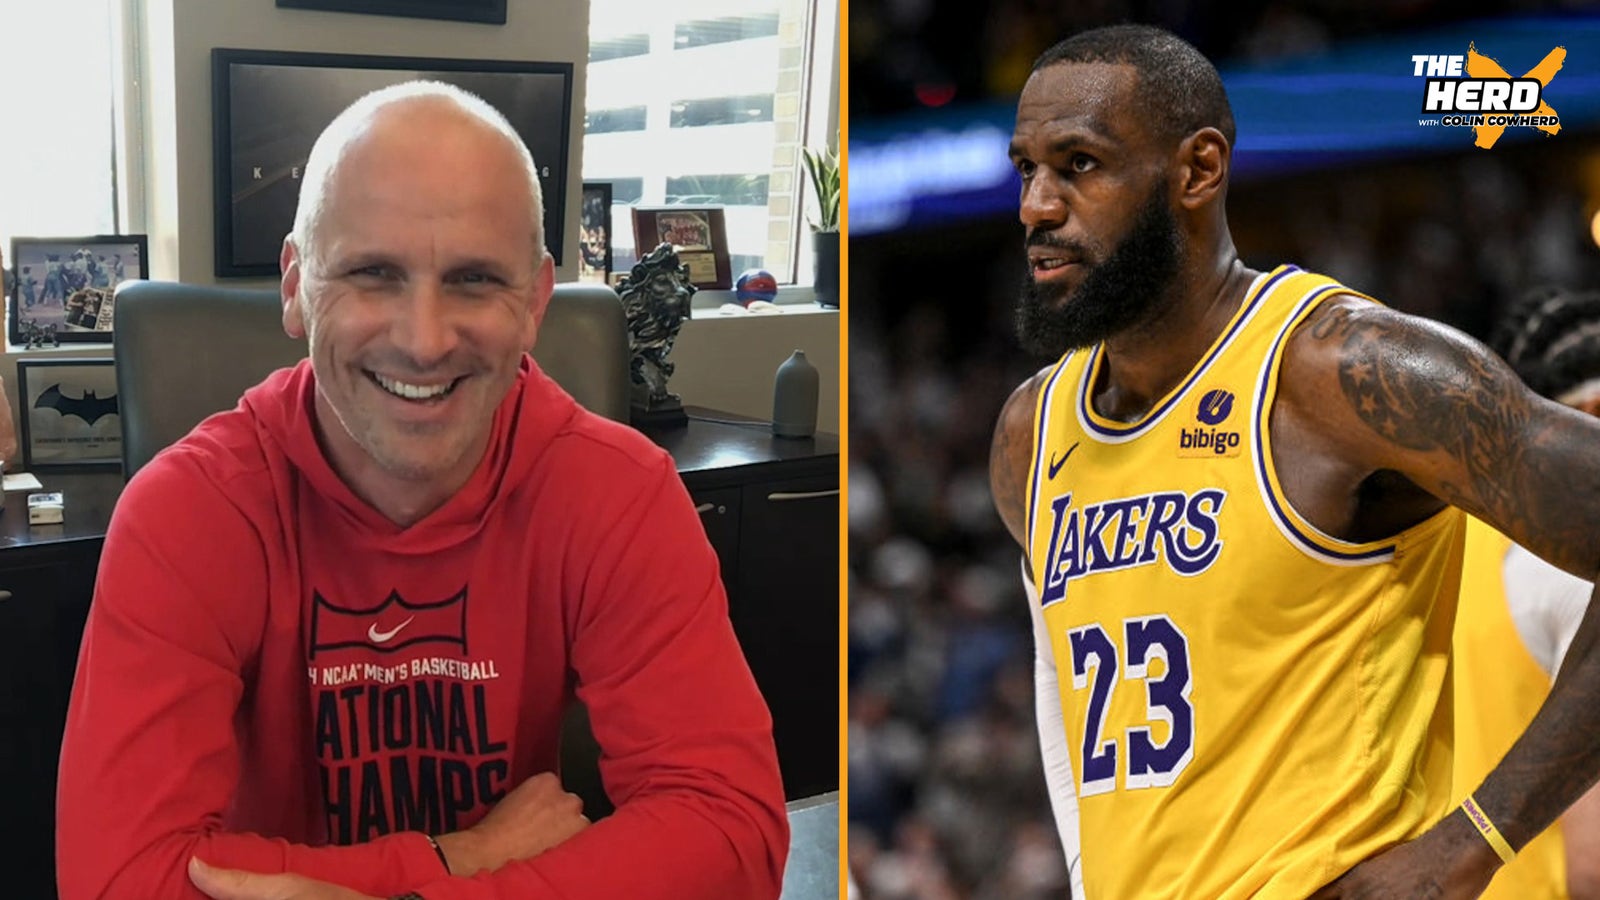 Dan Hurley reveals text messages with LeBron before deciding to return to UConn